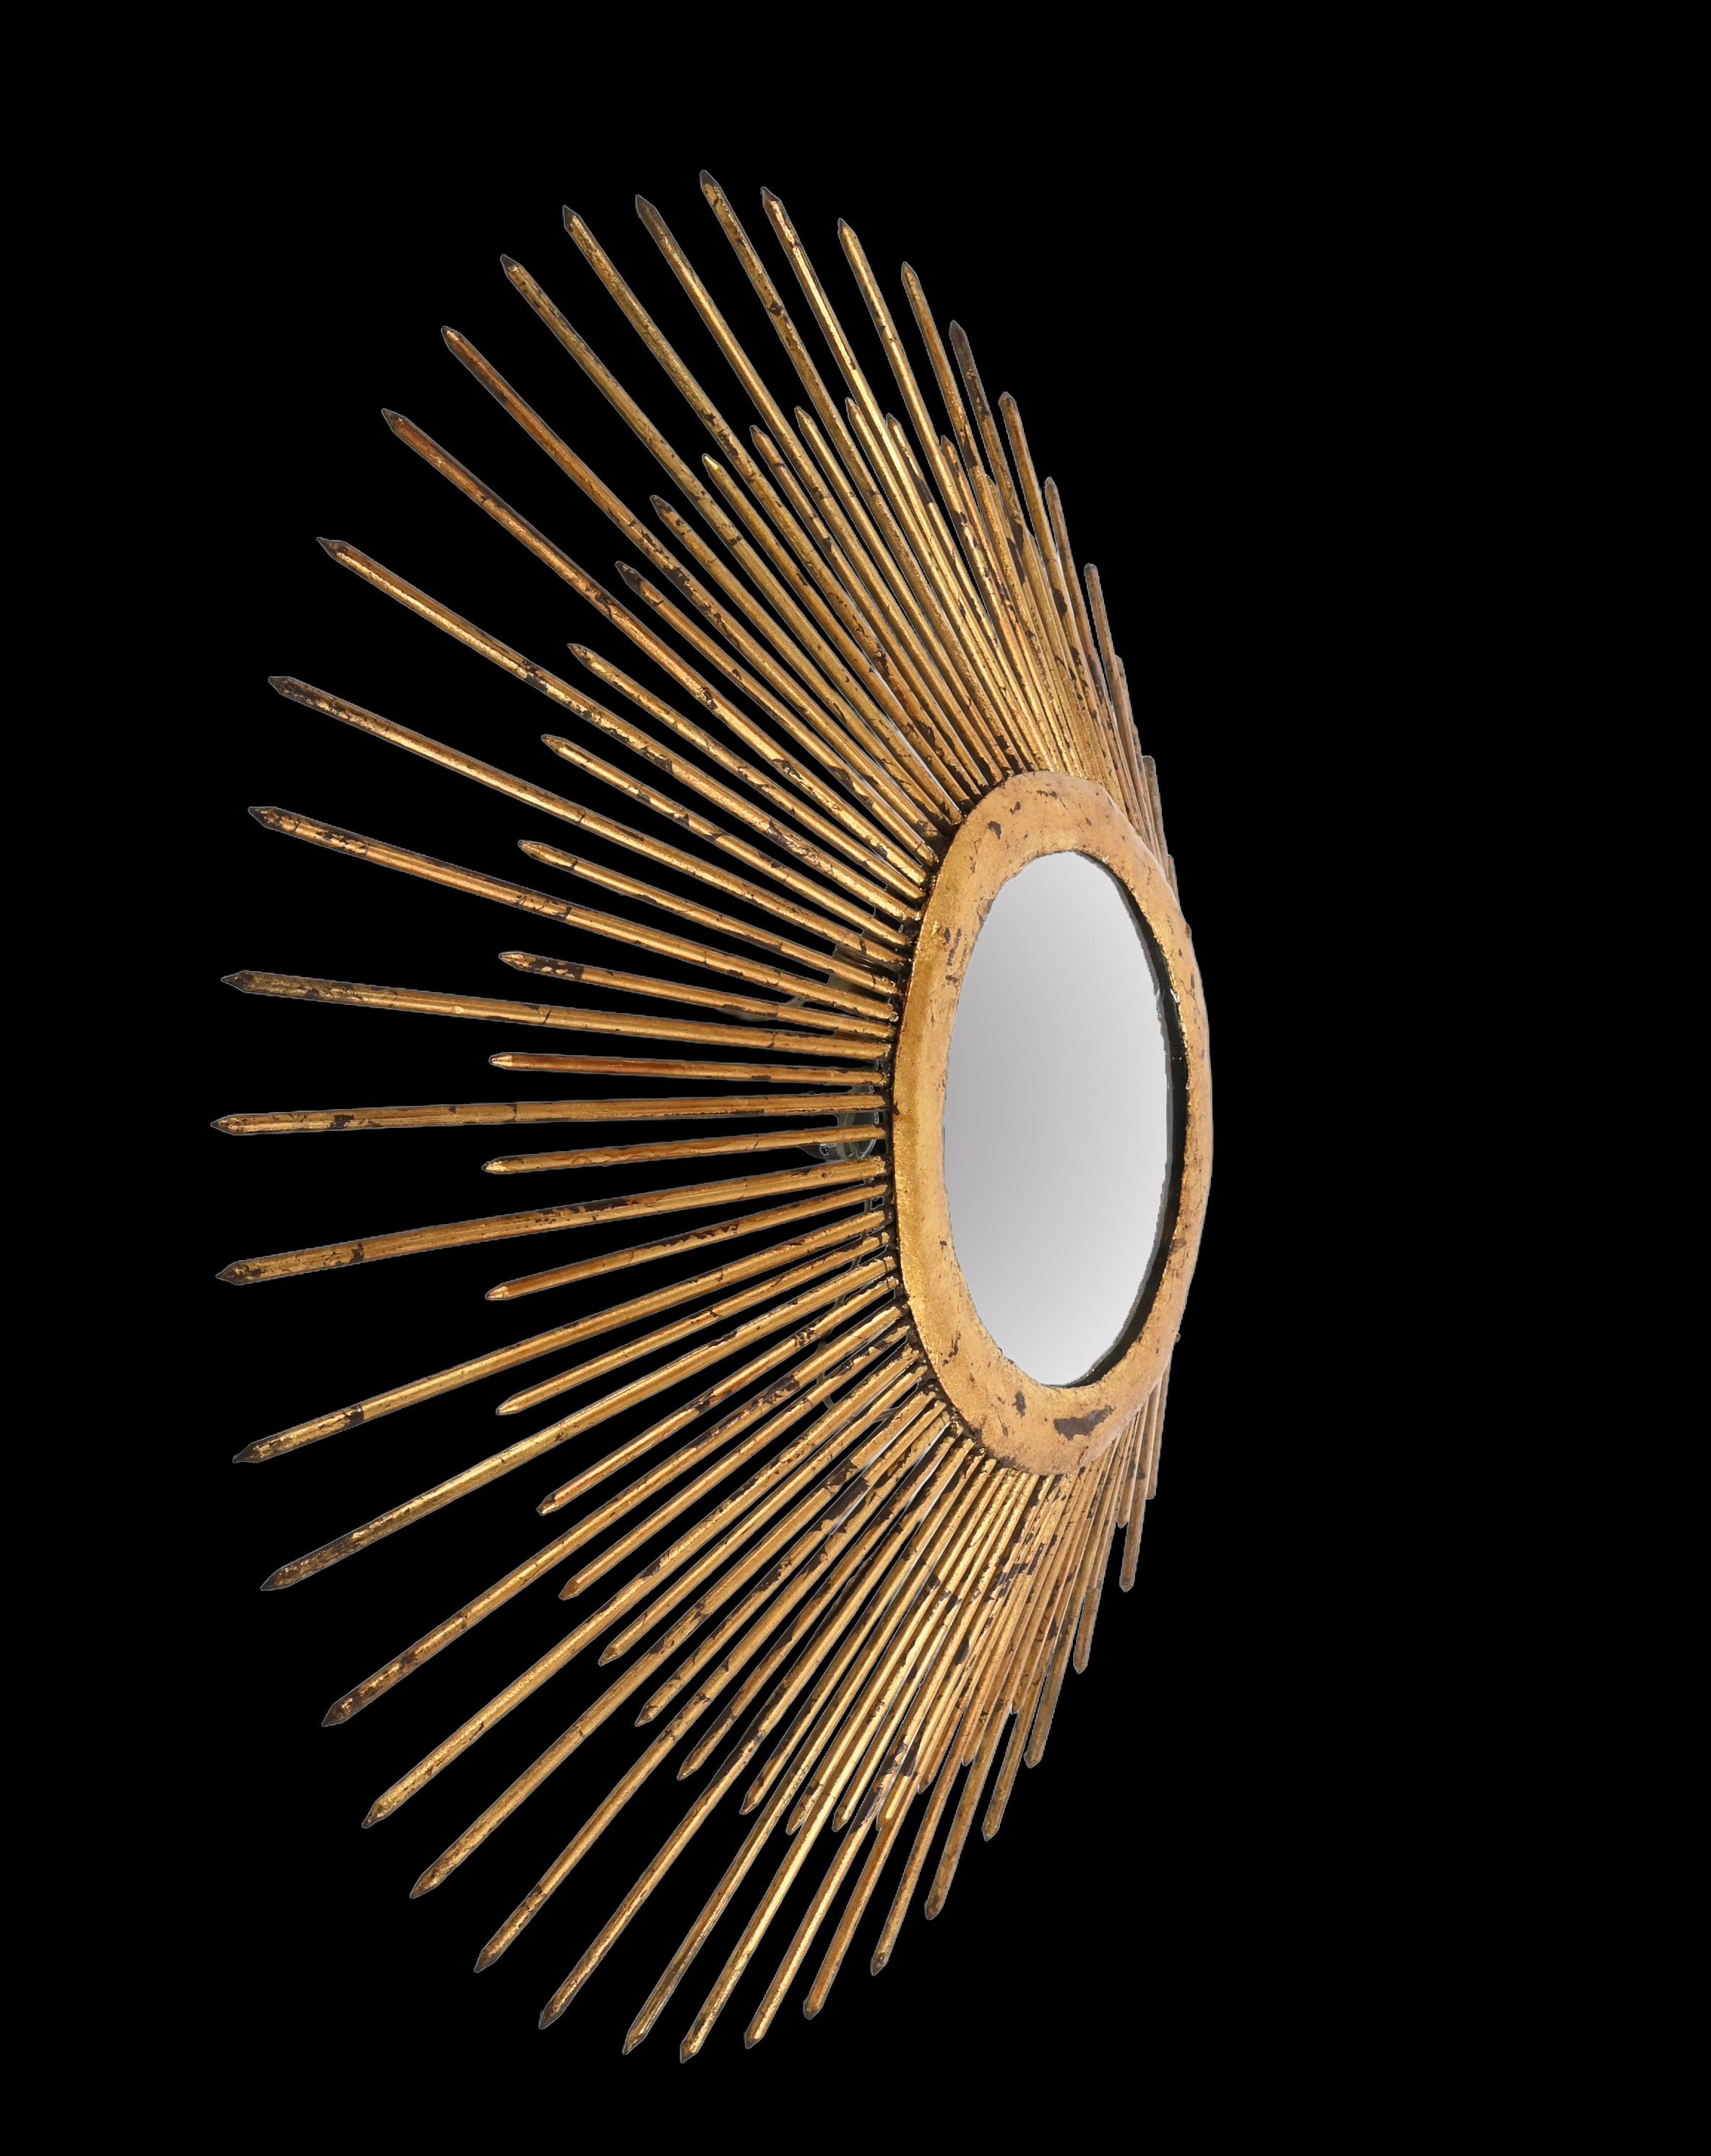 Midcentury Sunburst Mirror in Gilded Iron with Lighting, Italy, 1960s For Sale 4